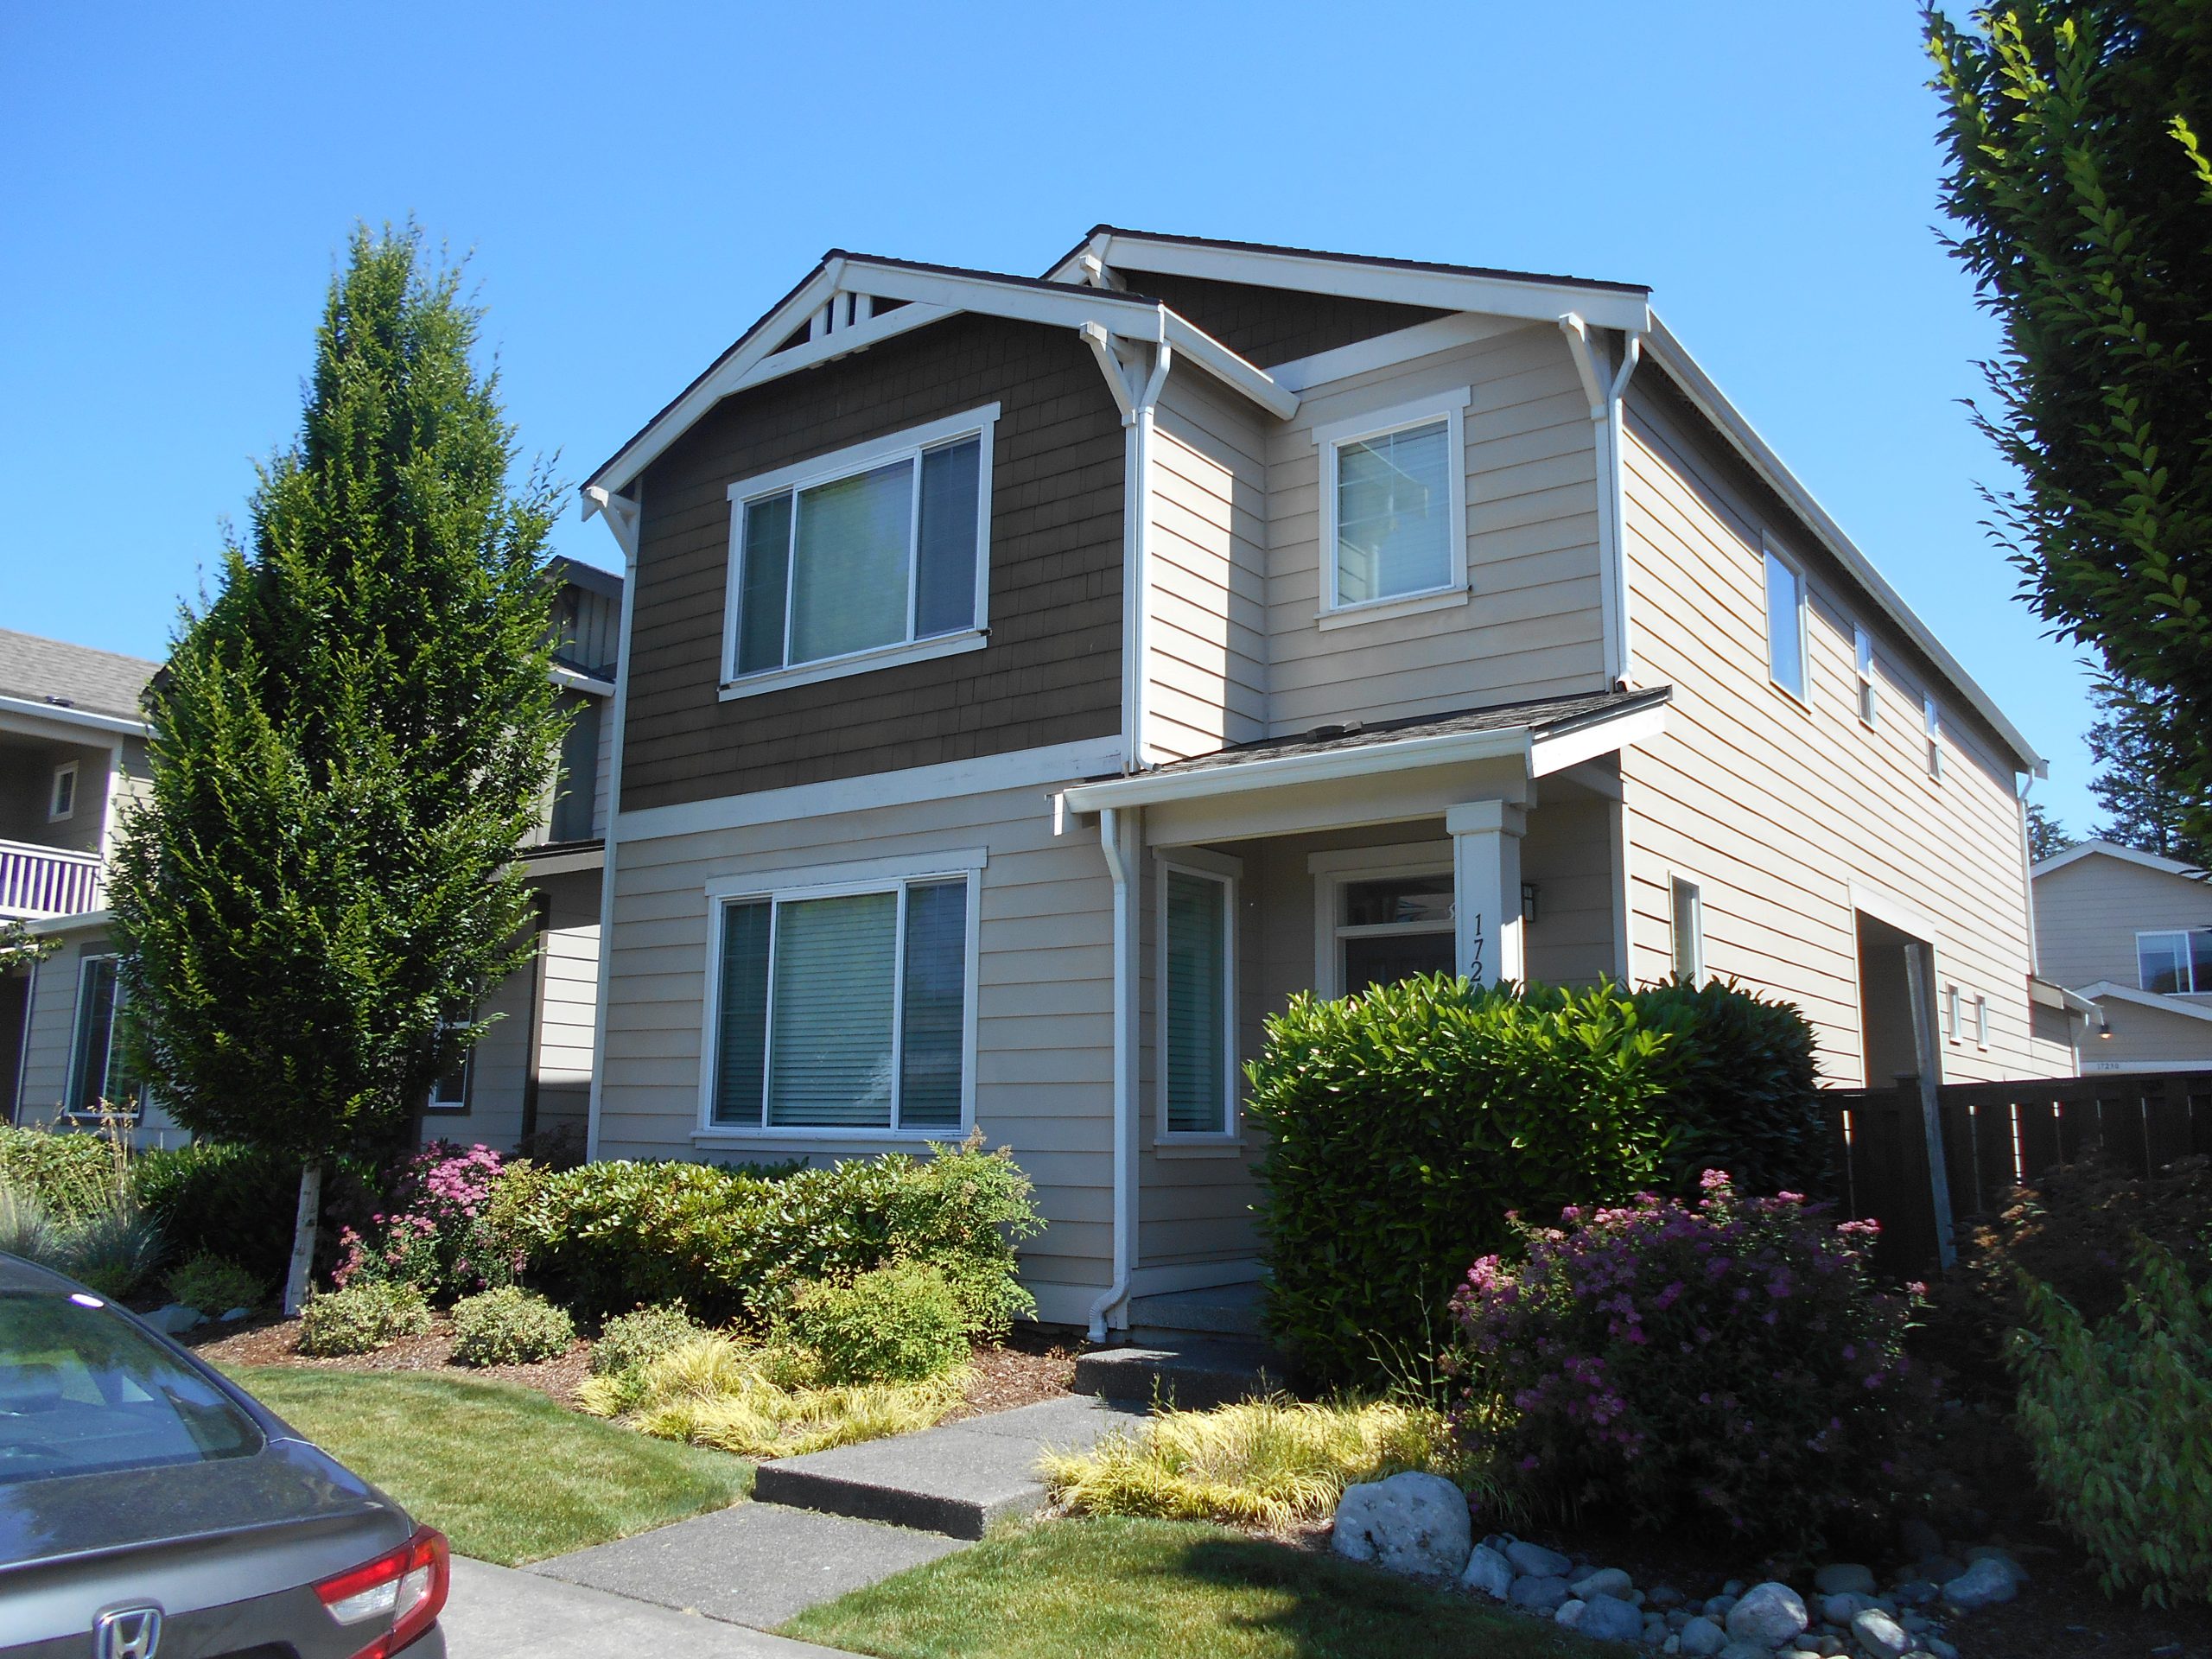 $2,295 – Picture Perfect in Puyallup! 3+ Bedrooms